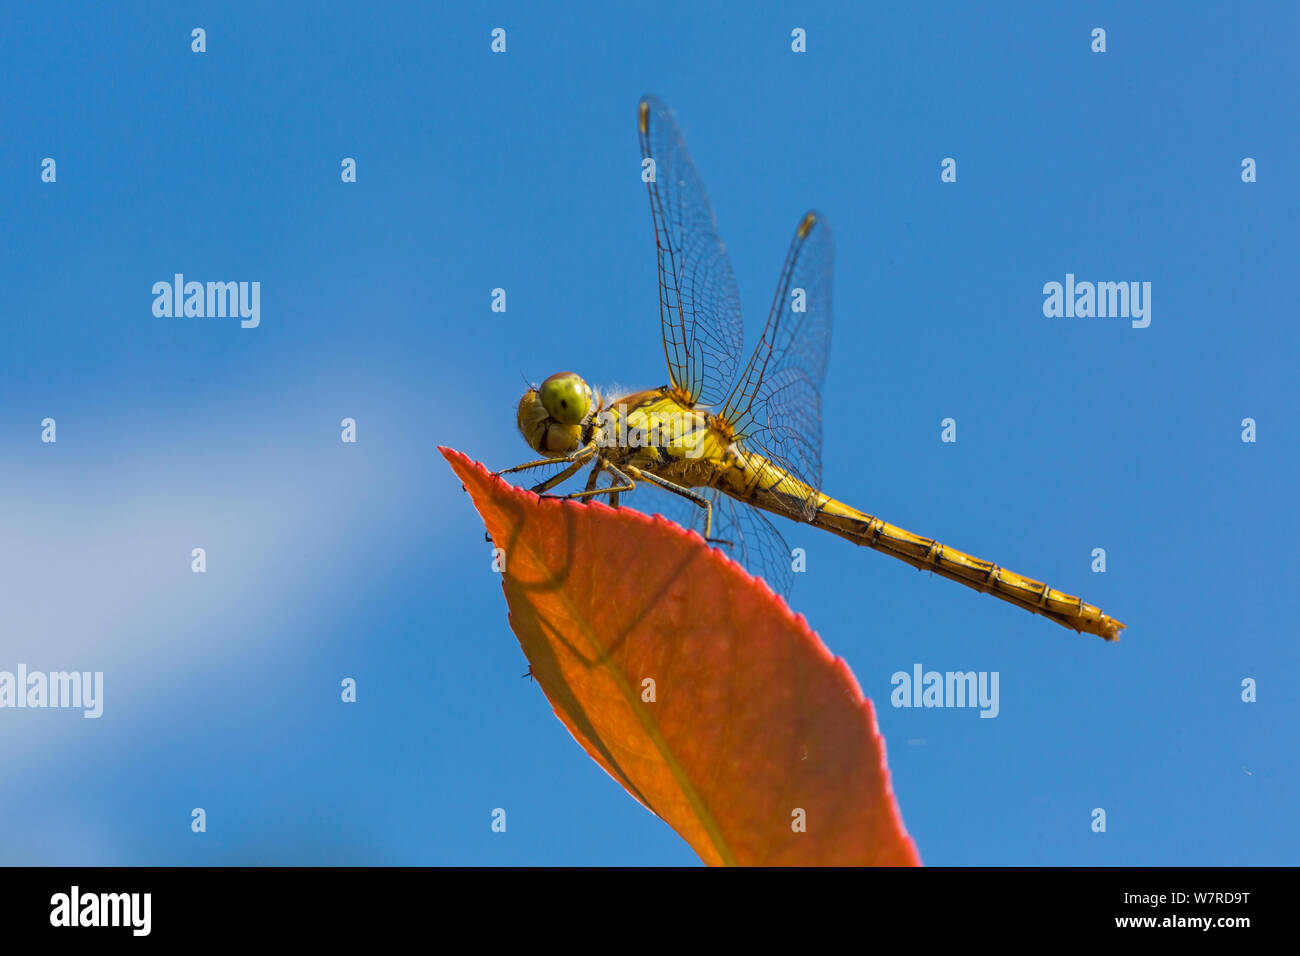 Bournemouth, Dorset UK. 7th Aug 2019. UK weather: Insects enjoy the sunshine feeding on the plants at Bournemouth. Common Darter dragonfly, Sympetrum striolatum resting on leaf of Red Robin shrub, photinia x fraseri looking up against blue sky.  Credit: Carolyn Jenkins/Alamy Live News Stock Photo